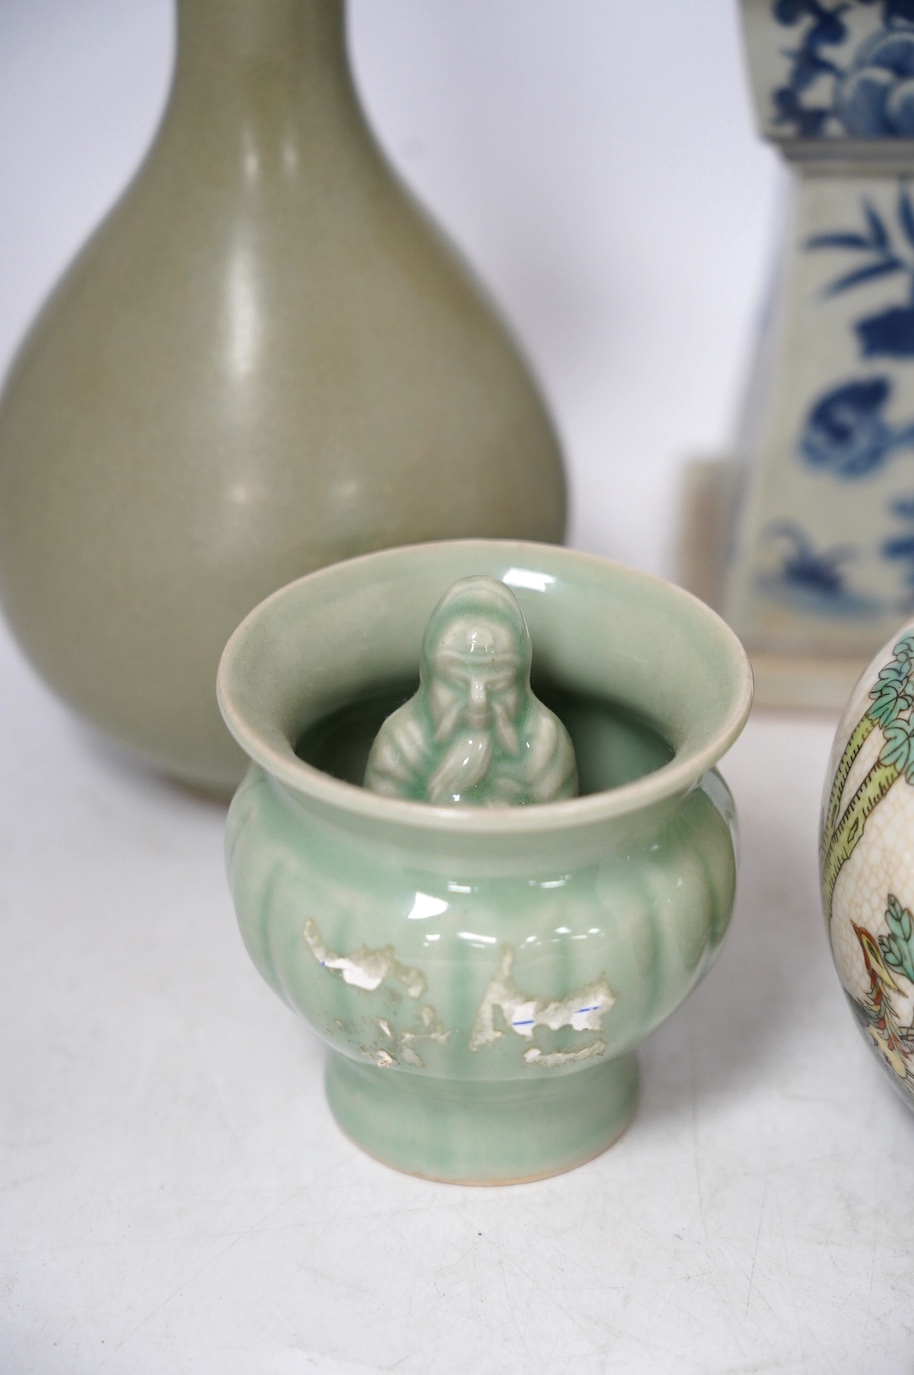 Chinese ceramics - a Celadon glazed vase, two jars and covers, a blue and white candlestick and a celadon pot, tallest 29cm (5). Condition - fair to good